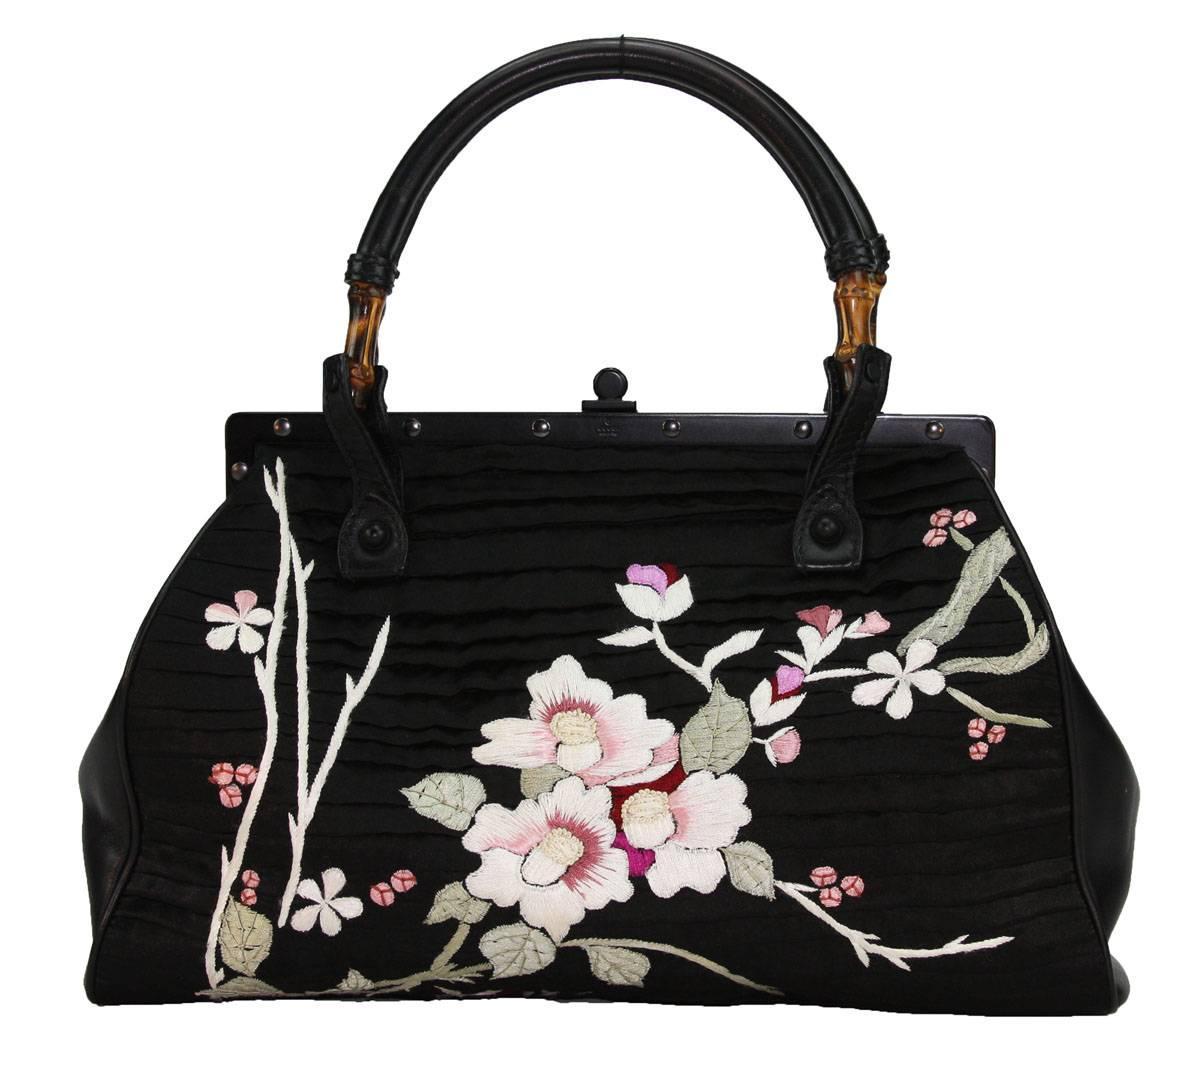 New Tom Ford For Gucci Black Silk Frame Japanese Flowers Bag
S/s 2003 Collection
N 112528 204990
Rare And Collectible
Color – Black
Silk, Leather, Bamboo
Floral Japanese Embroidery In White, Pink, Red, Green On Both Sides
Leather Side